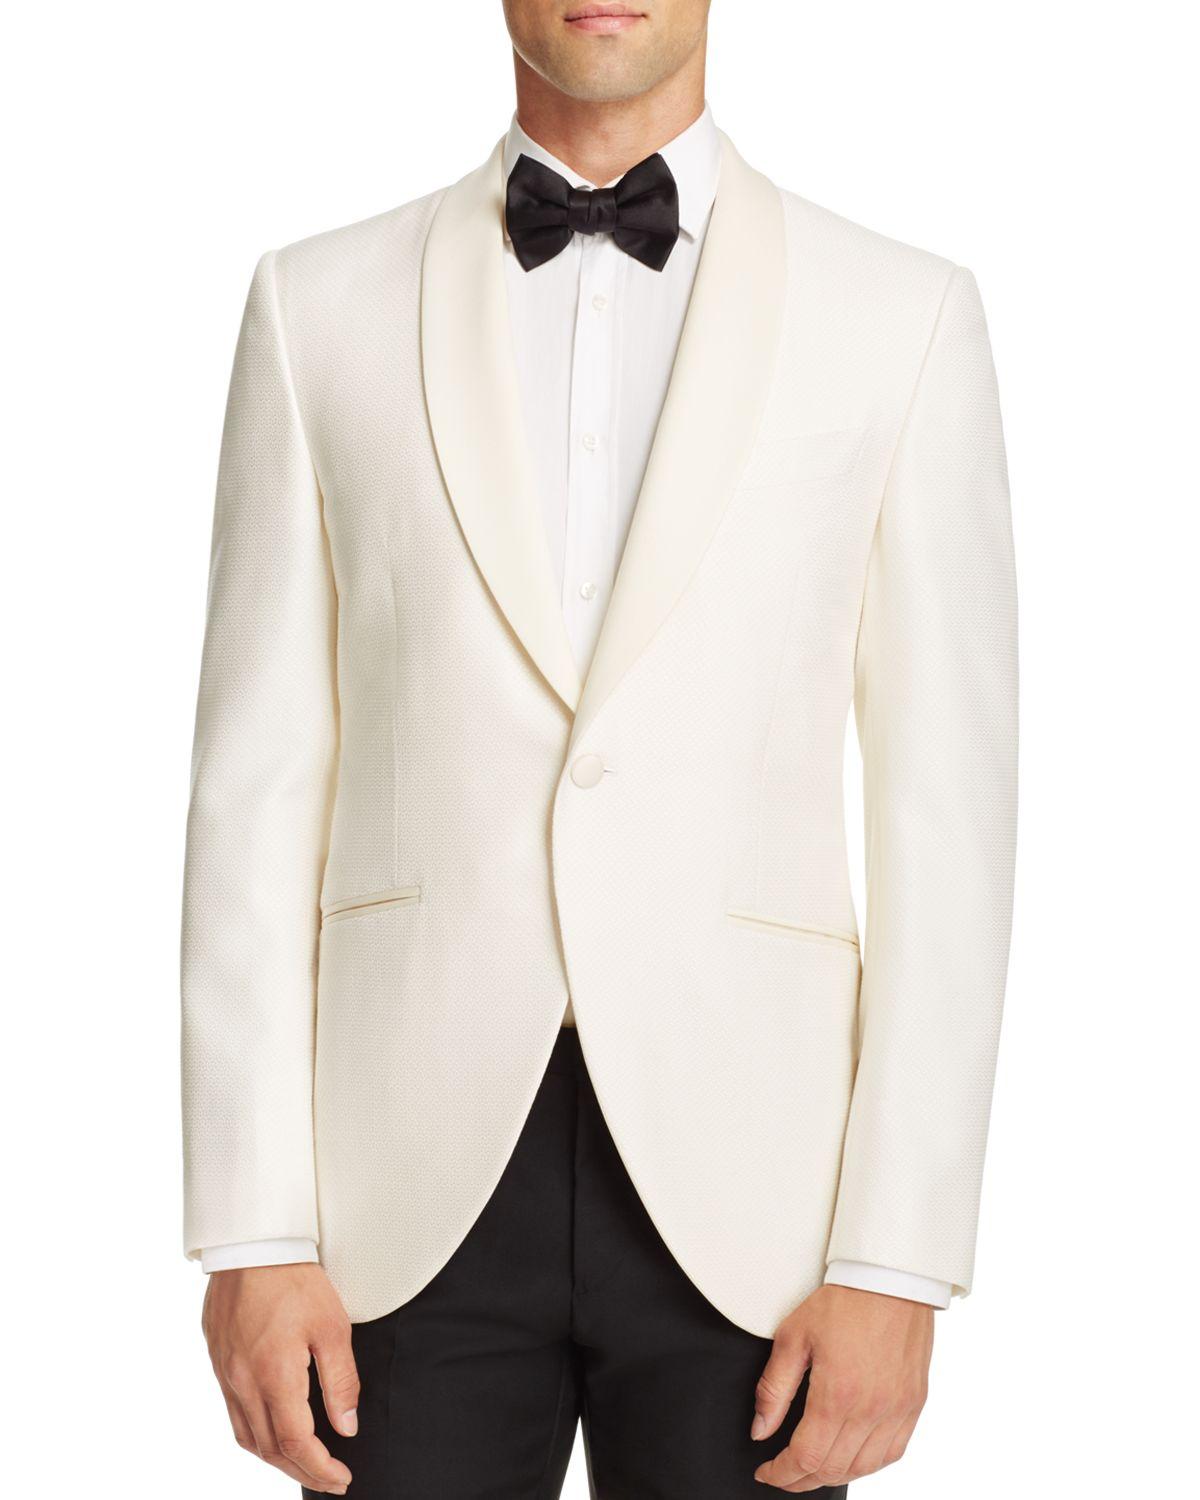 Canali Textured Regular Fit Dinner Jacket in White for Men - Lyst